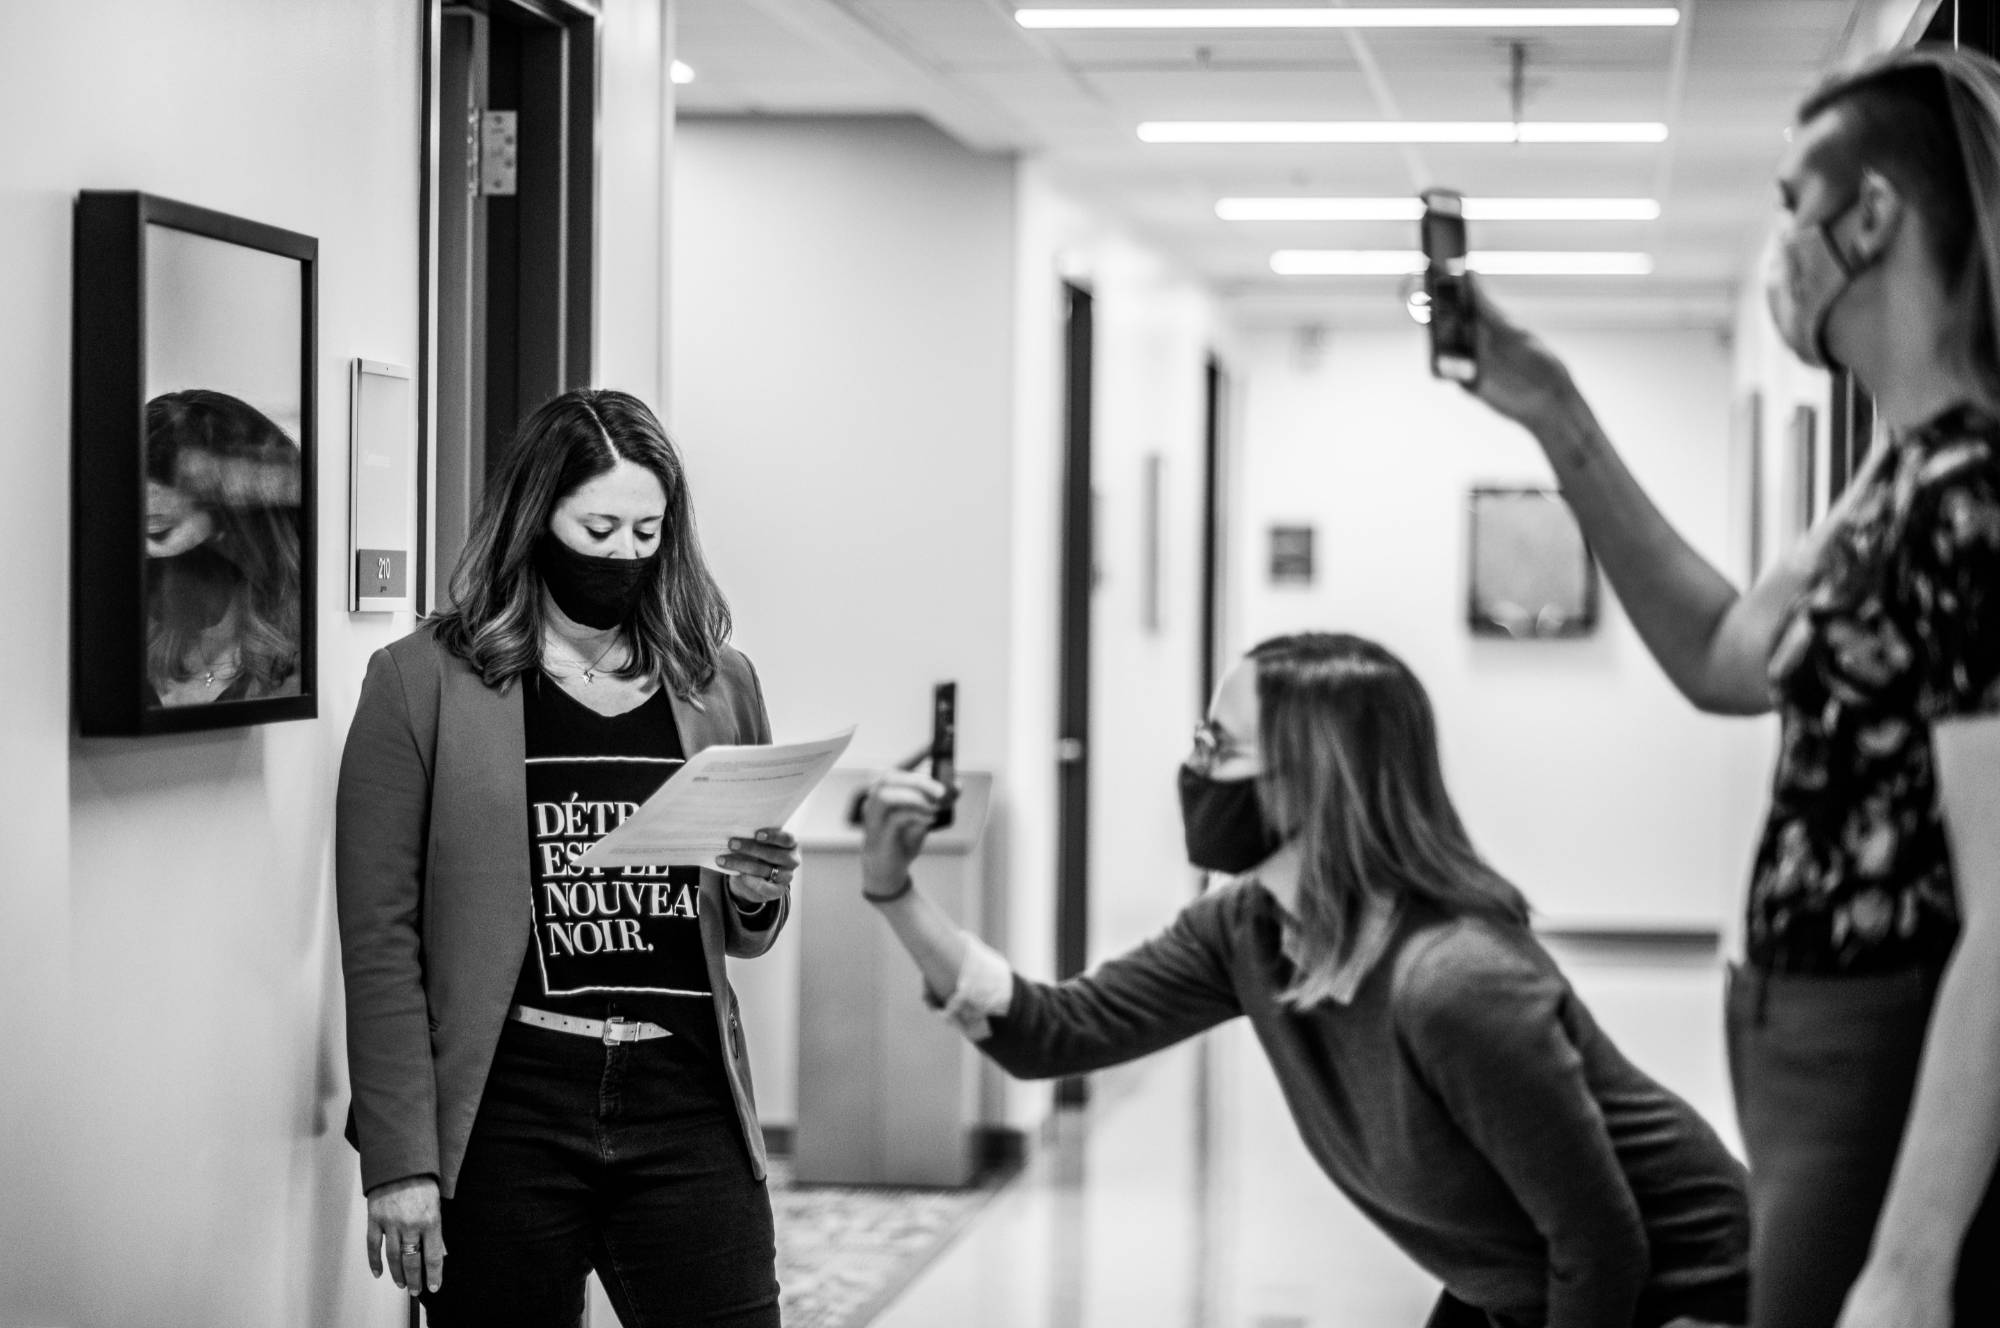 Two students take photos of another student using their phones